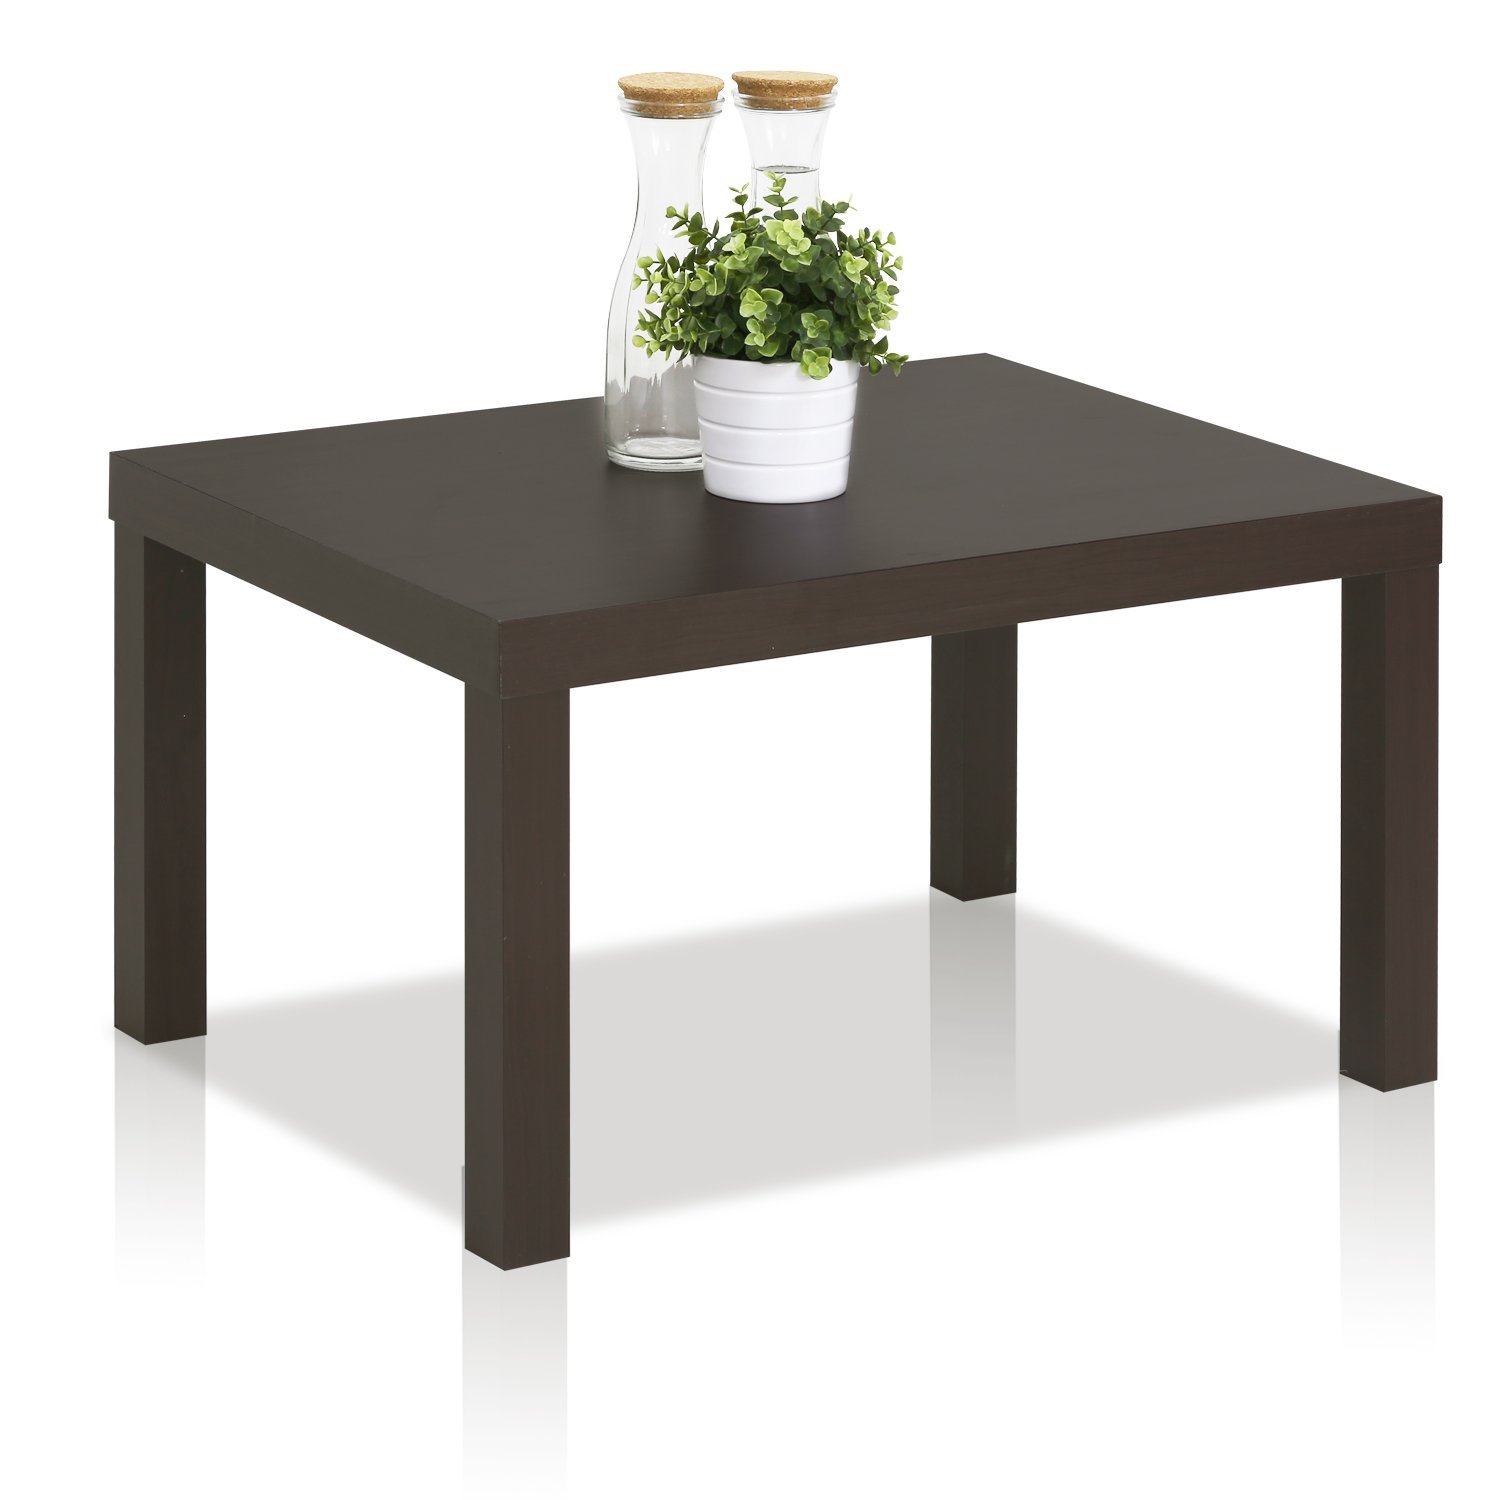 A simple and small rectangular wood coffee table. 